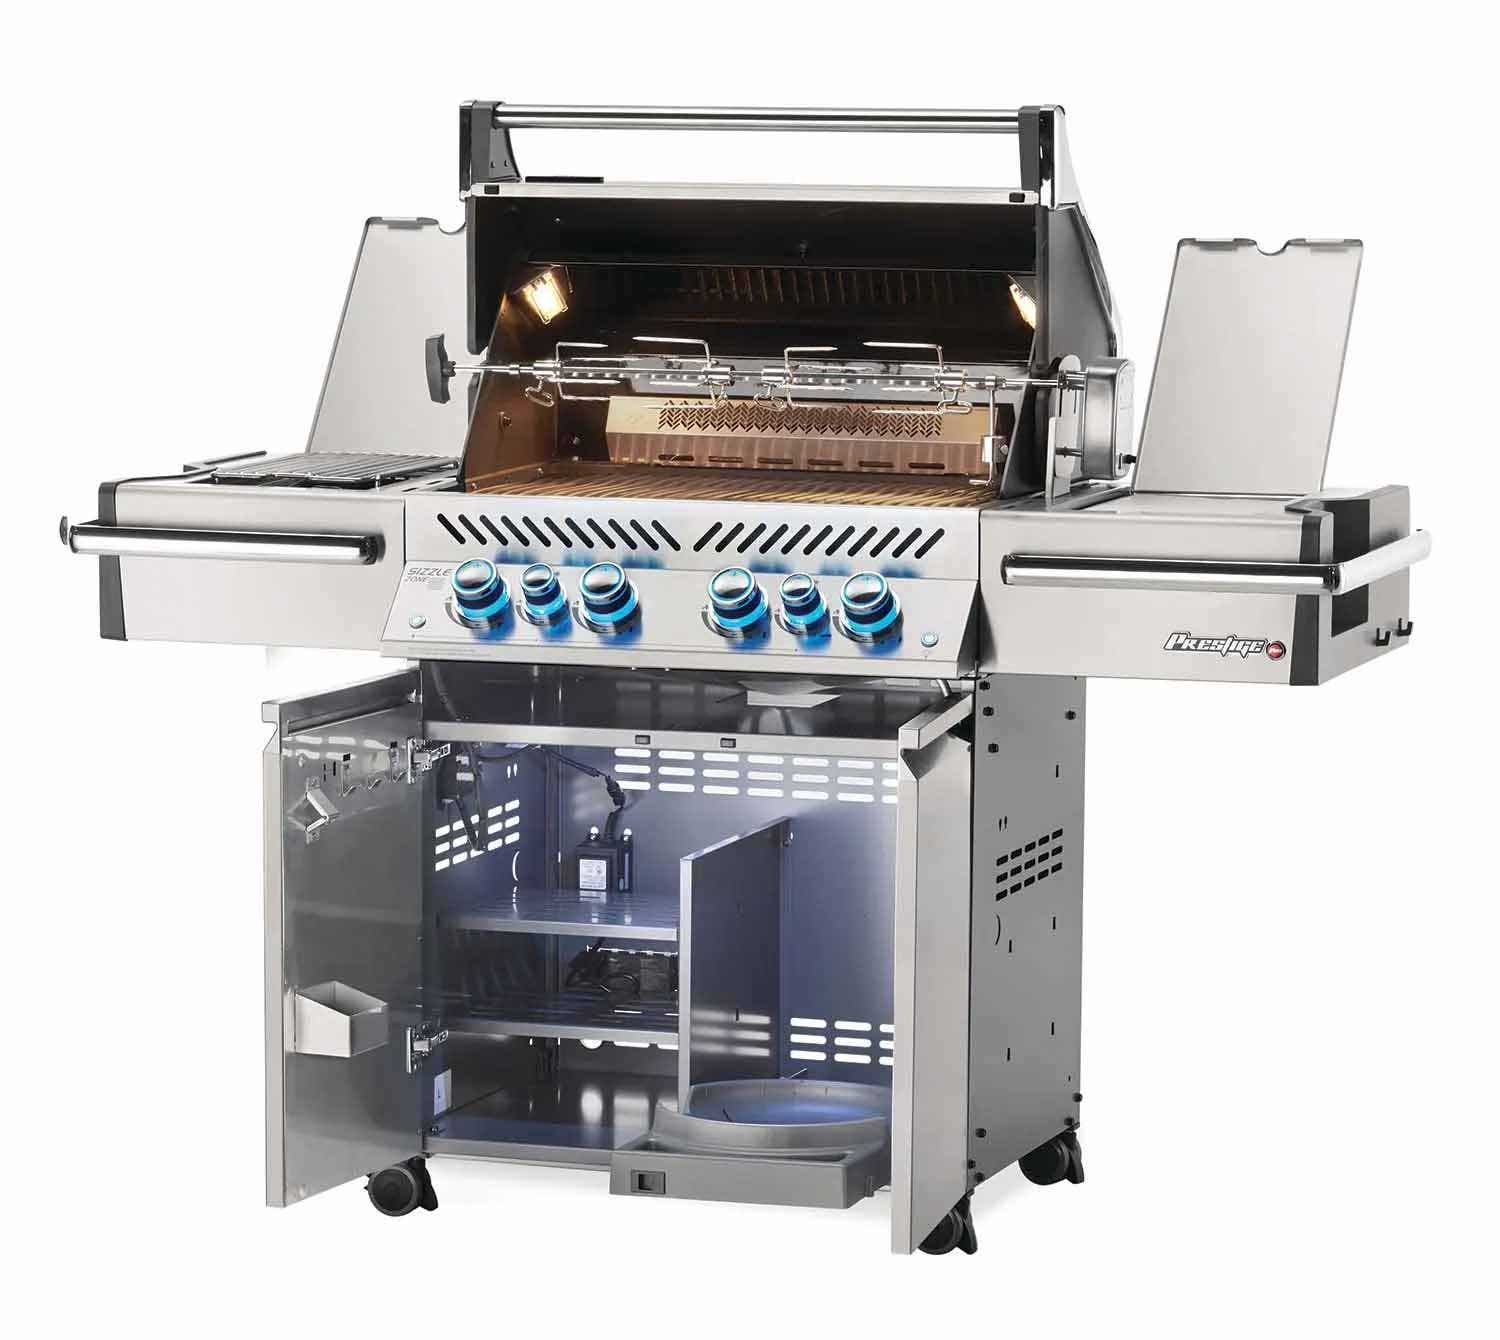 Napoleon Grills Prestige PRO 500 Gas Grill with Infrared Side and Rear Burners, Stainless Steel Outdoor Grills